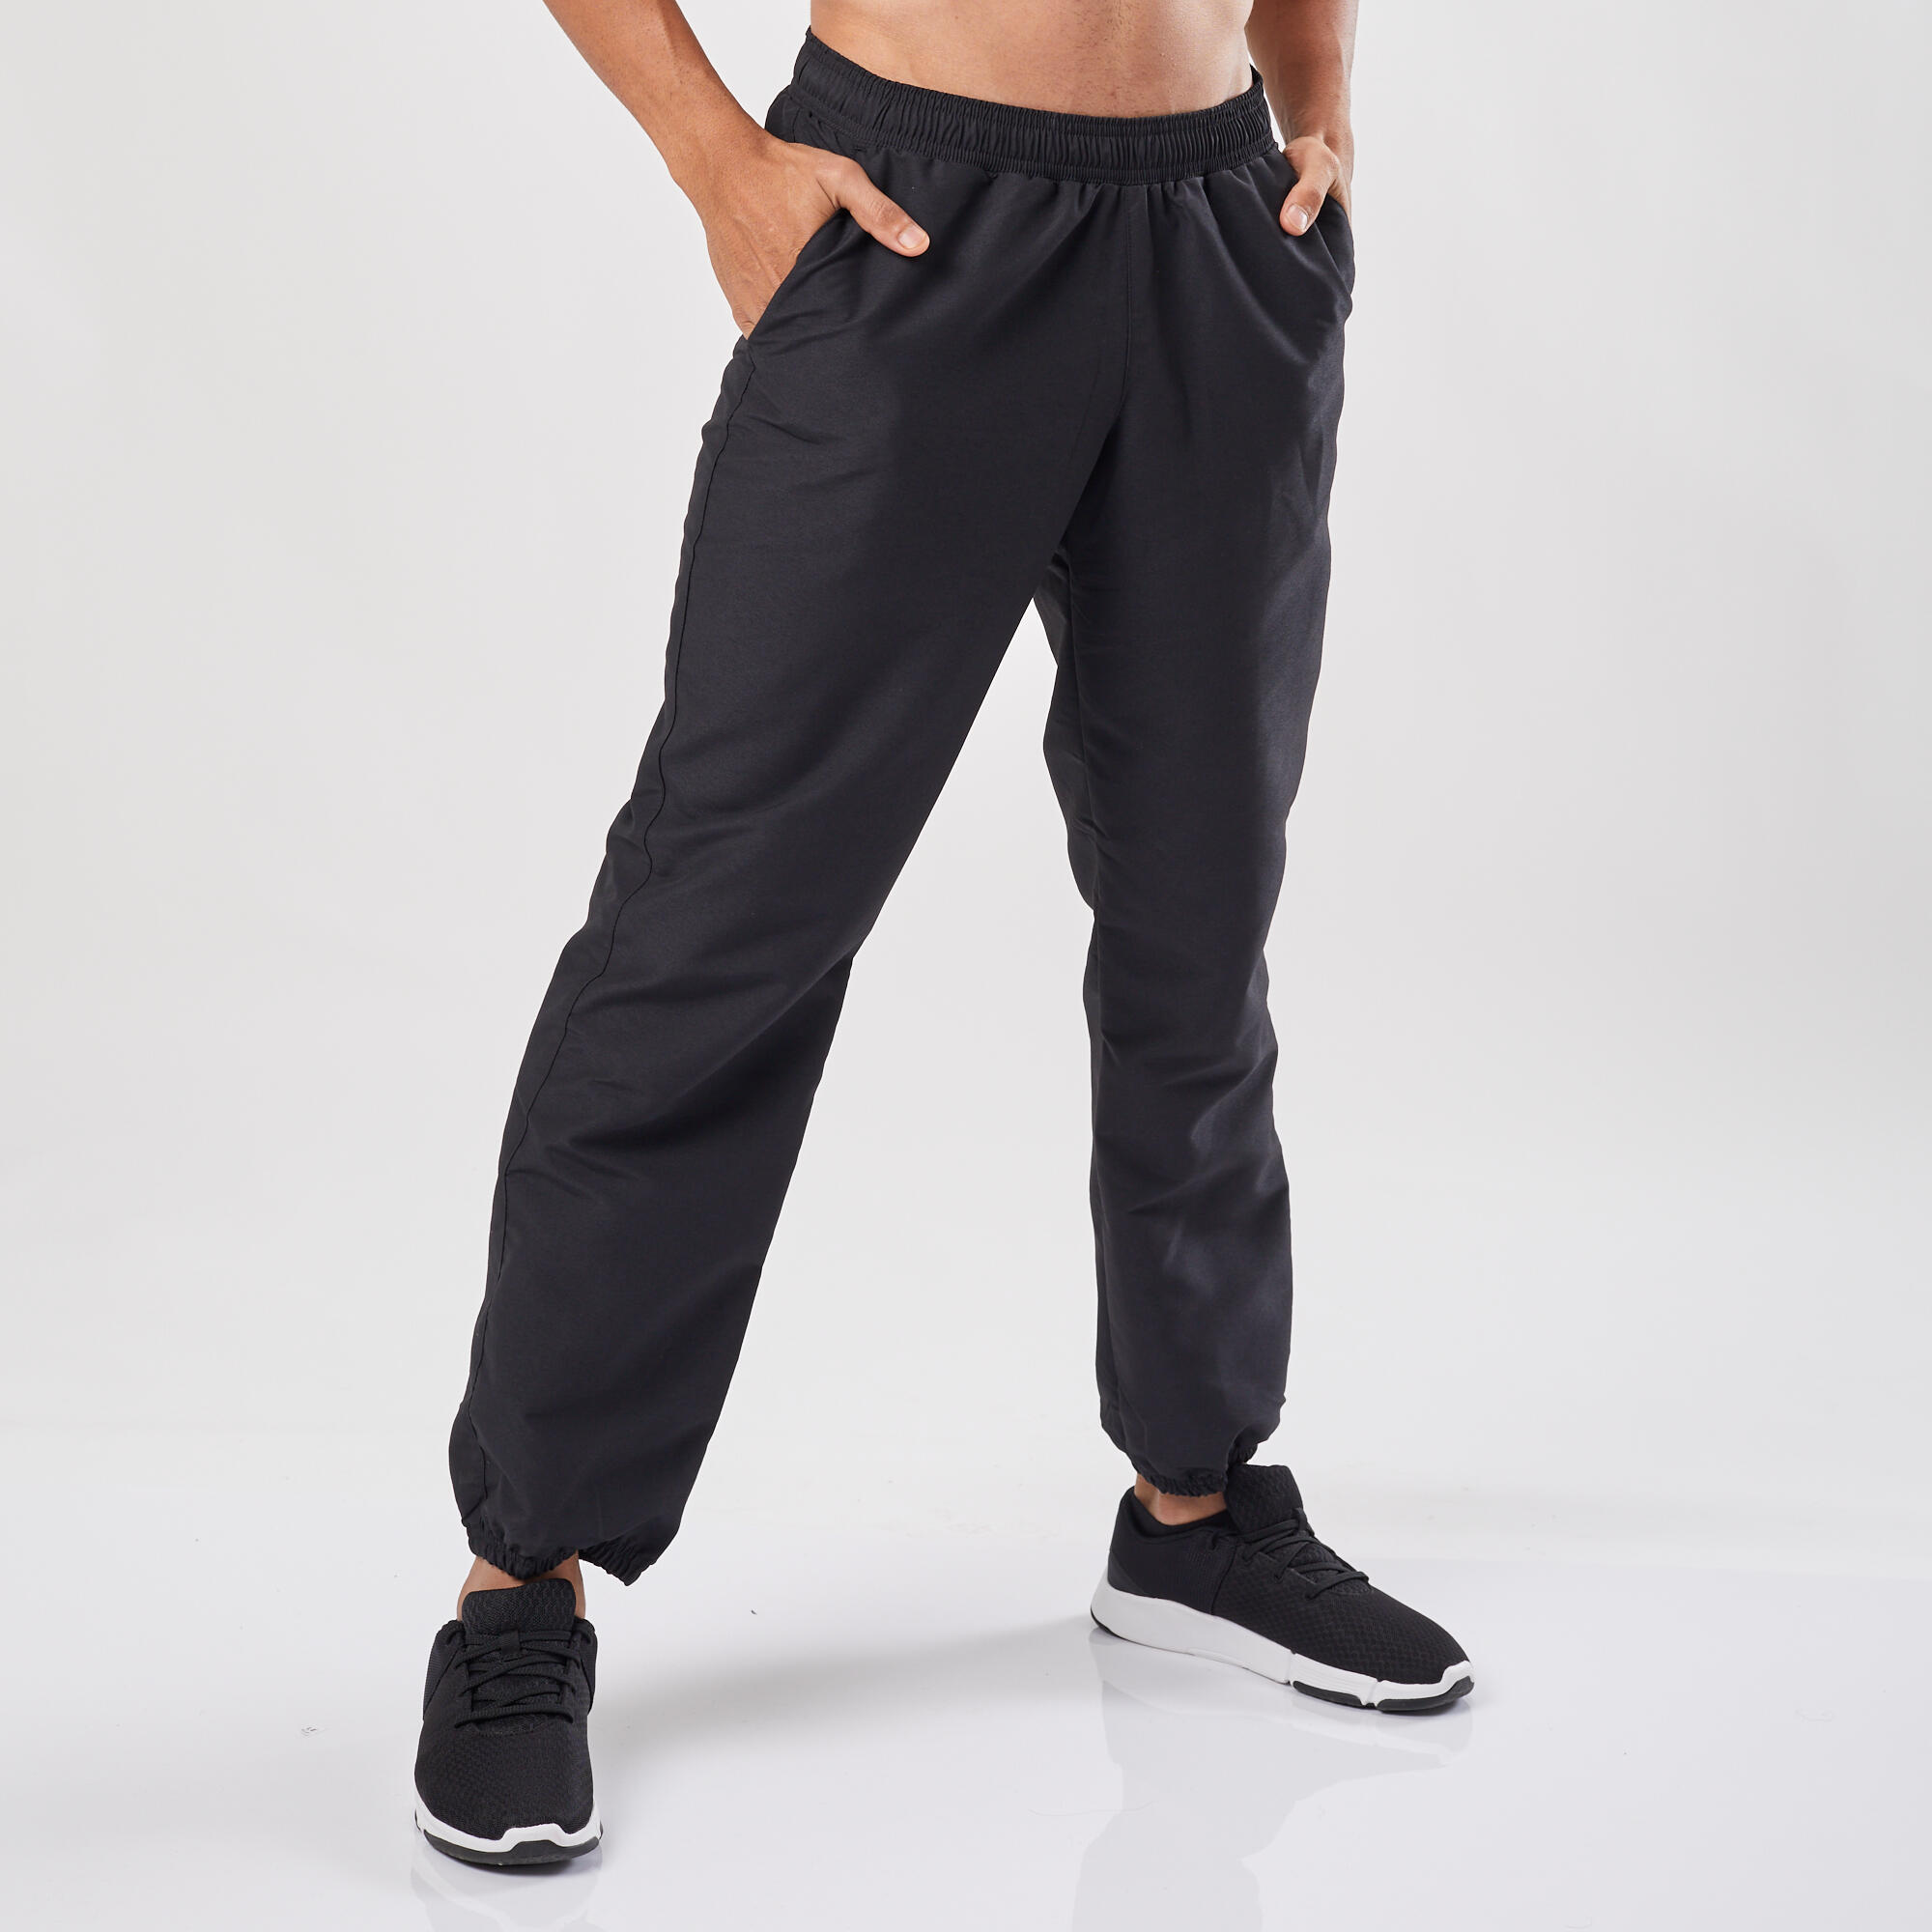 Sports Trousers  Buy Sports Trousers online in India